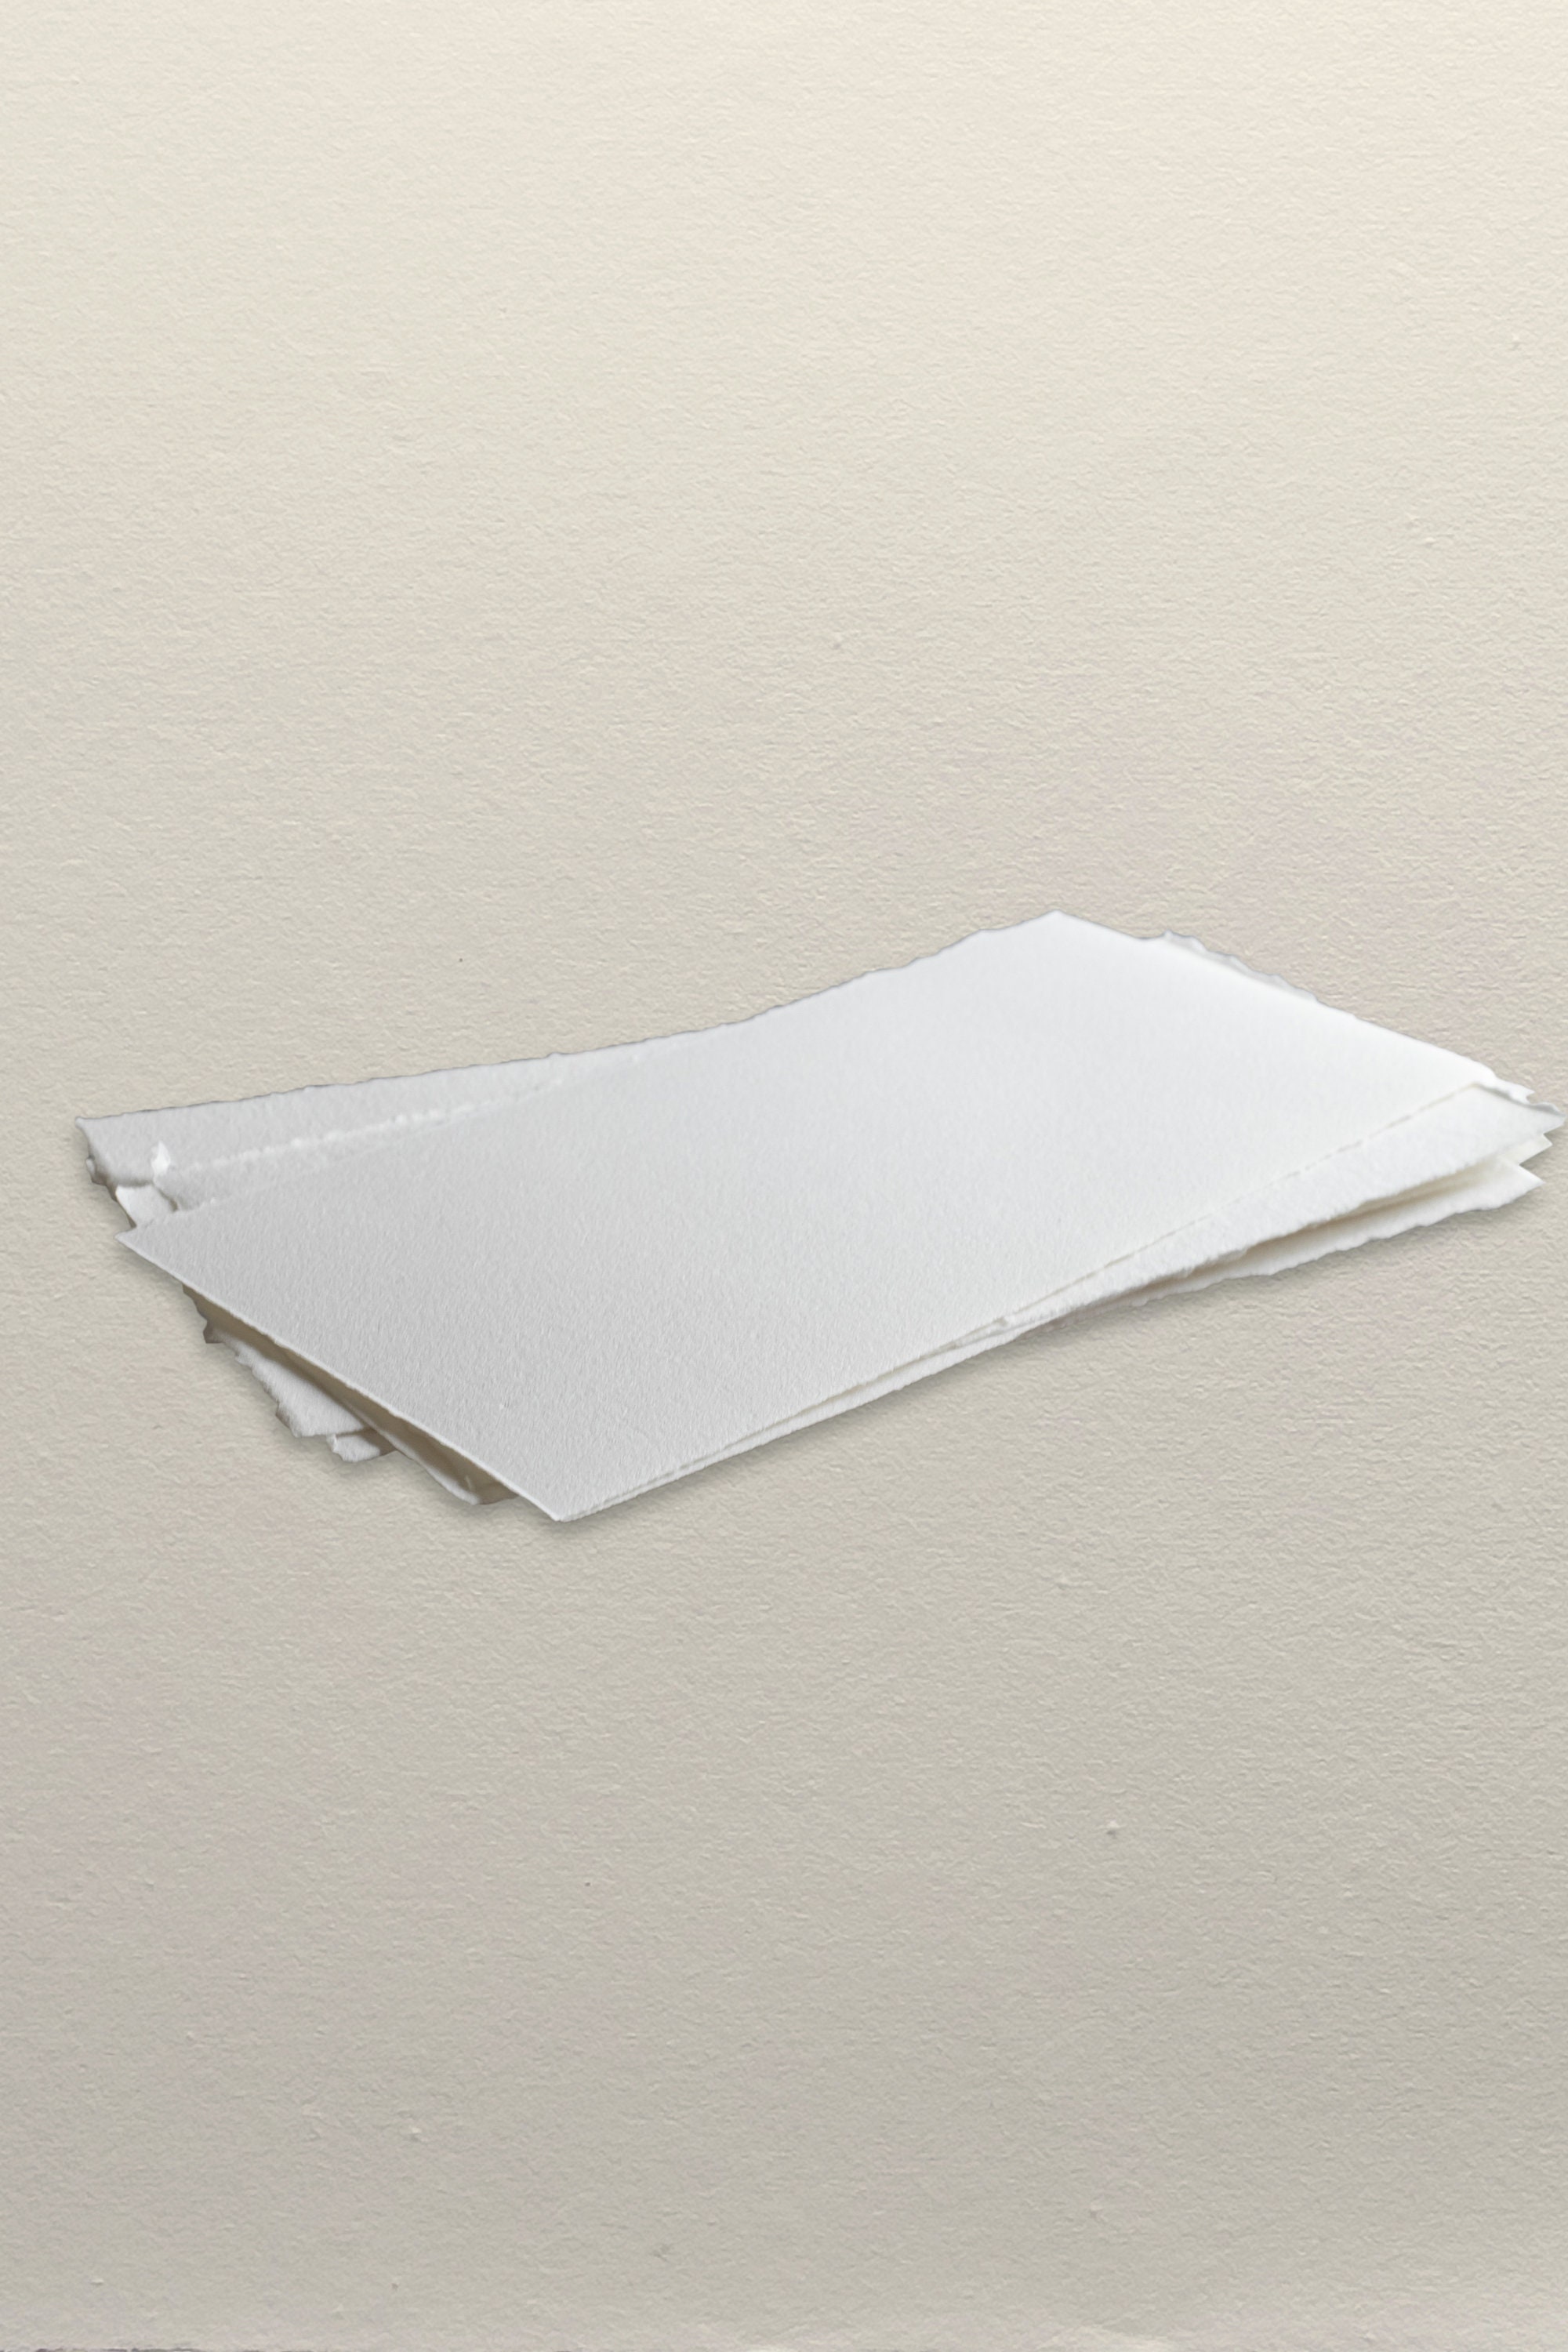 Replacement Wax opaque, Solid White Color & Semi-transparent Thin Pages  Cover Paper for Diamond Paintings, Release Paper 